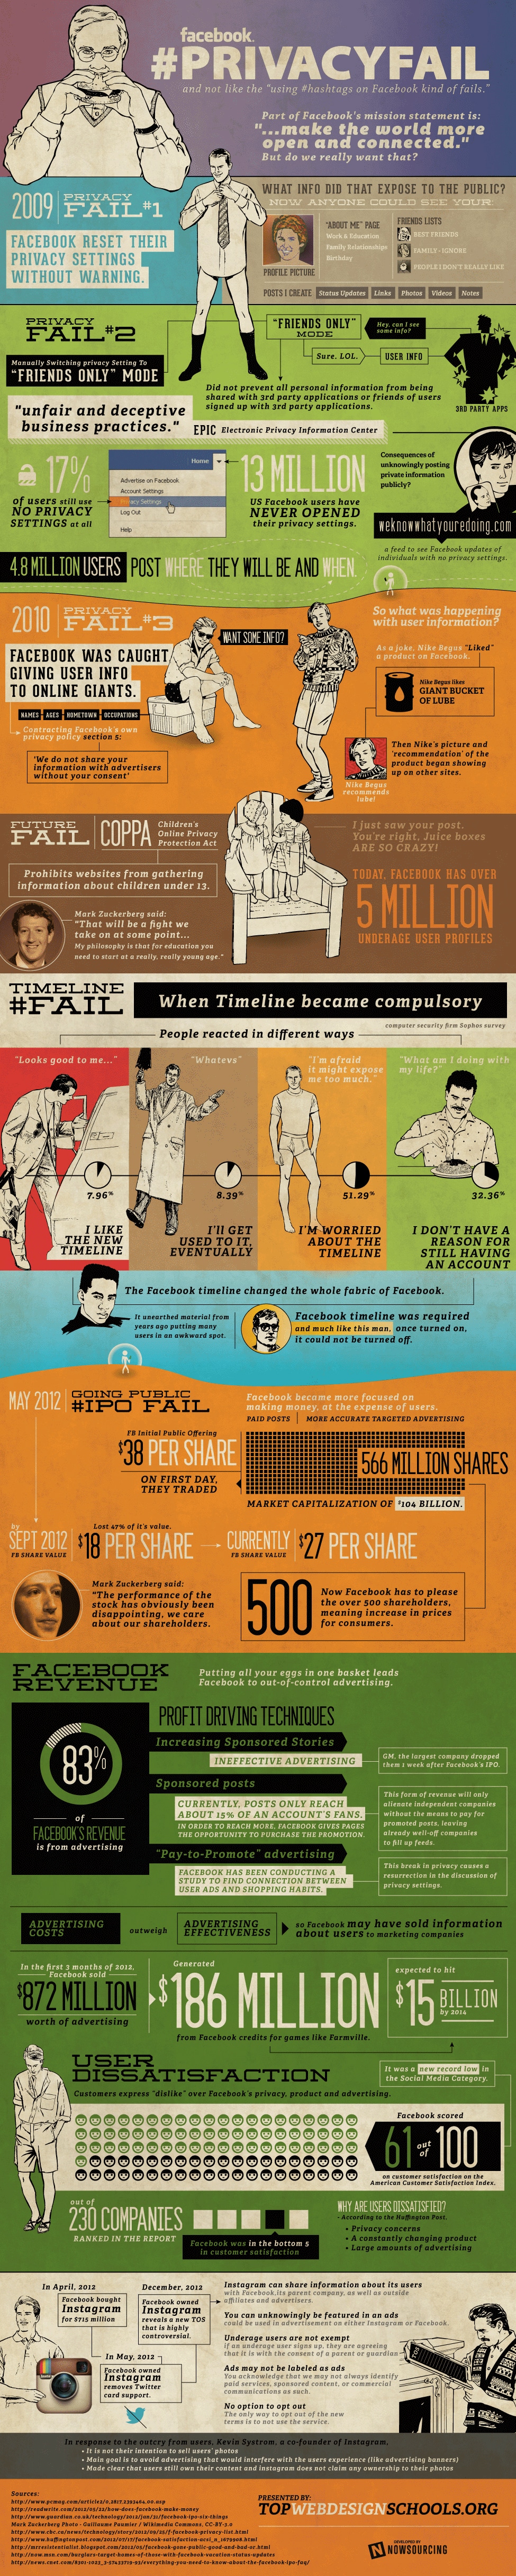 History Of Facebook Privacy Fails & How They Affect Us [Infographic]